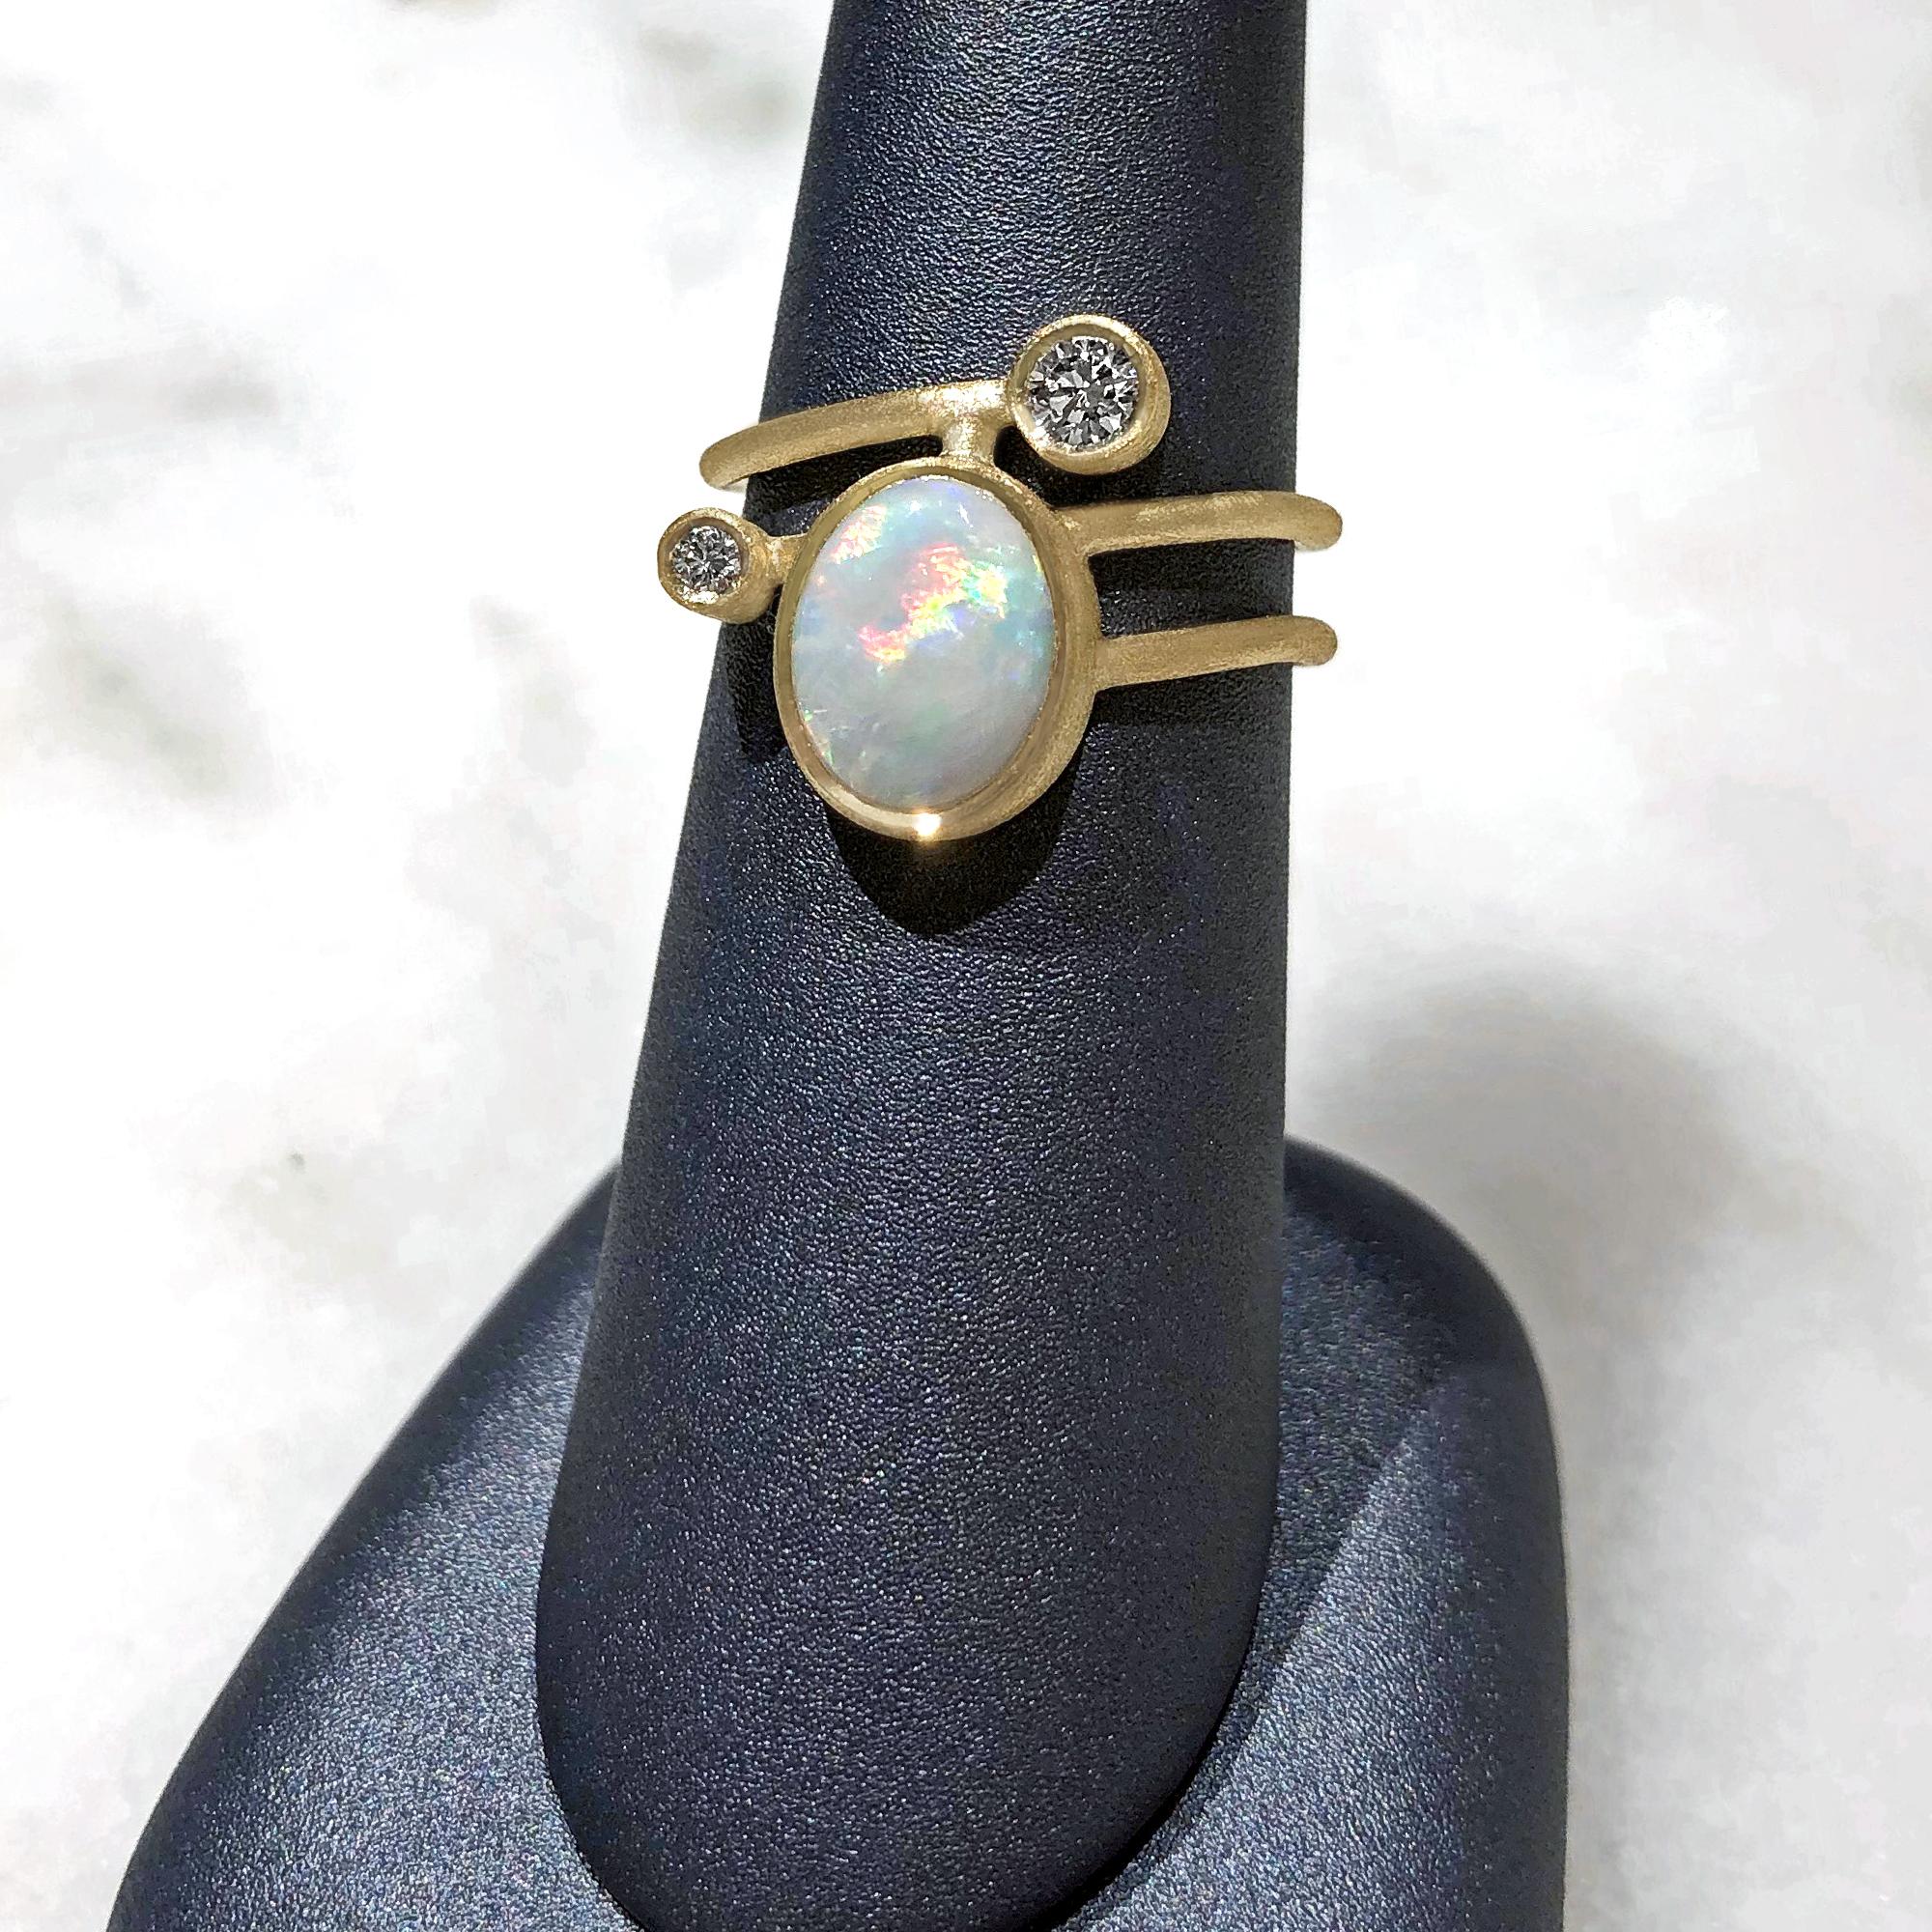 One of a Kind Gamma Ellipse Ring handcrafted in London by jewelry maker Shimell and Madden in beautifully textured 18k yellow gold featuring an oval australian white opal and accented with two round brilliant cut white diamonds totaling 0.22 carats.